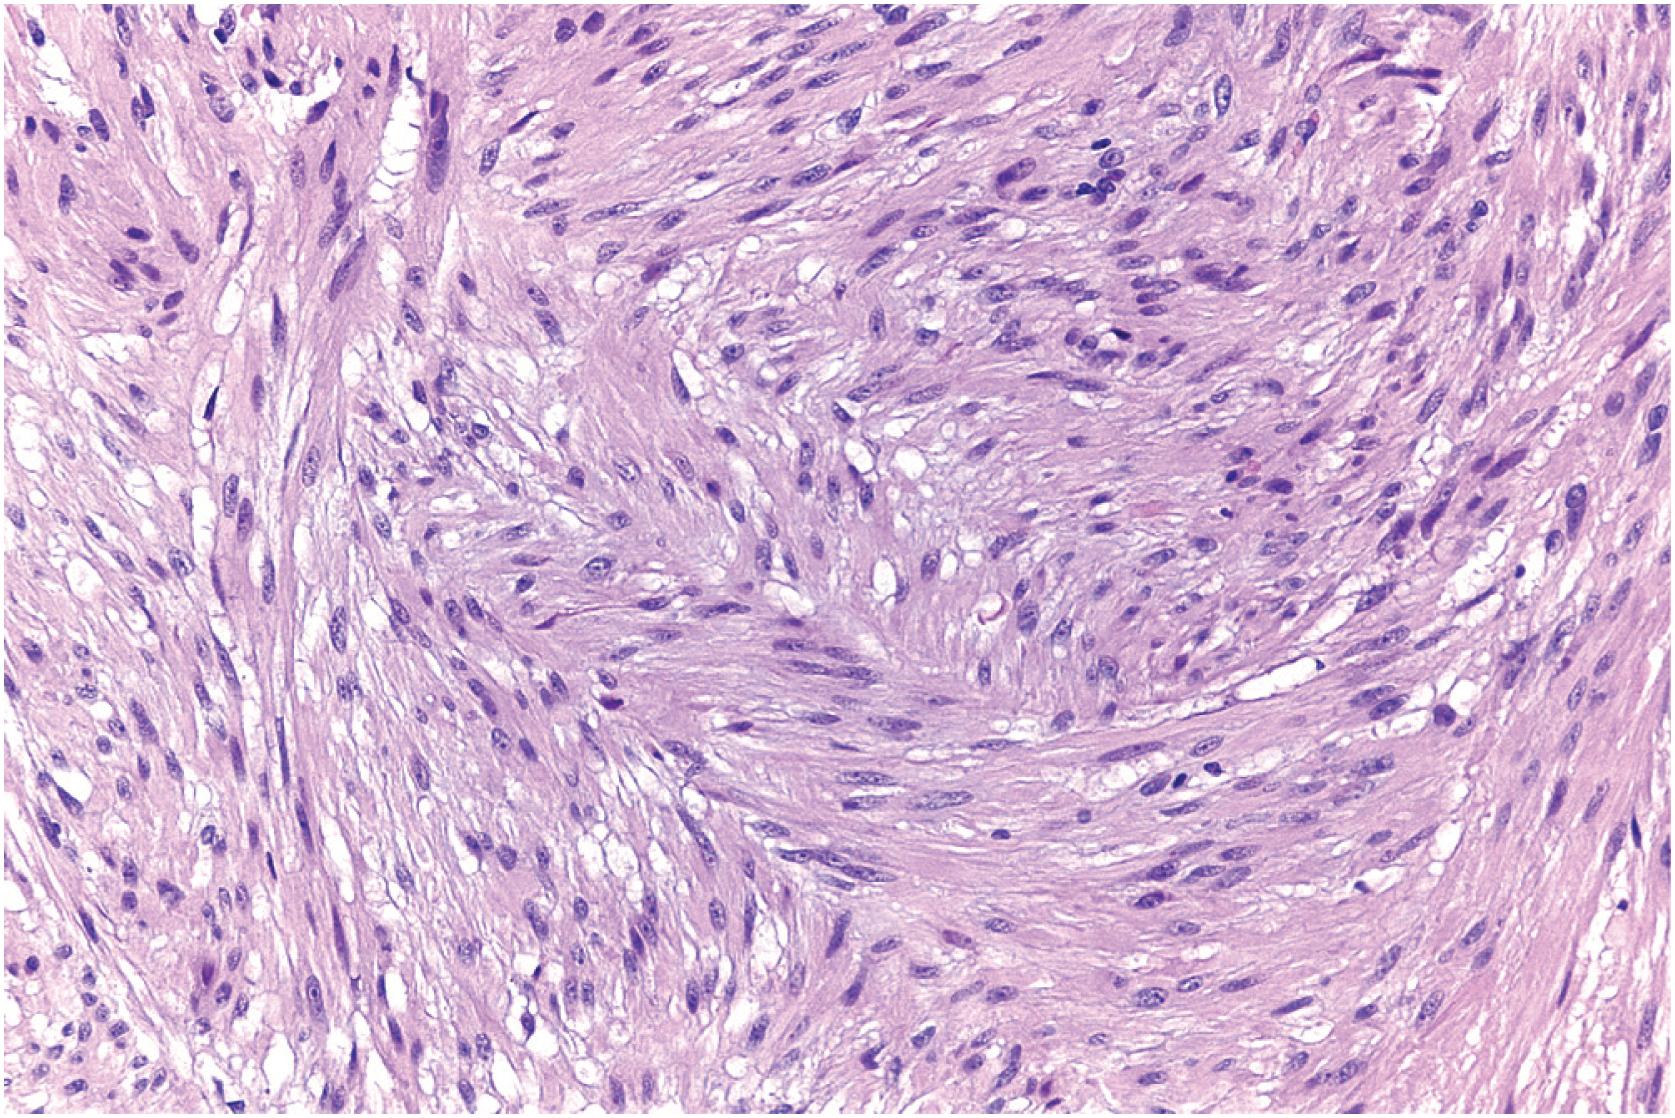 Fig. 6.1, Leiomyoma composed of fascicles of bland spindled cells with blunt-ended nuclei and cytoplasmic vacuolation.